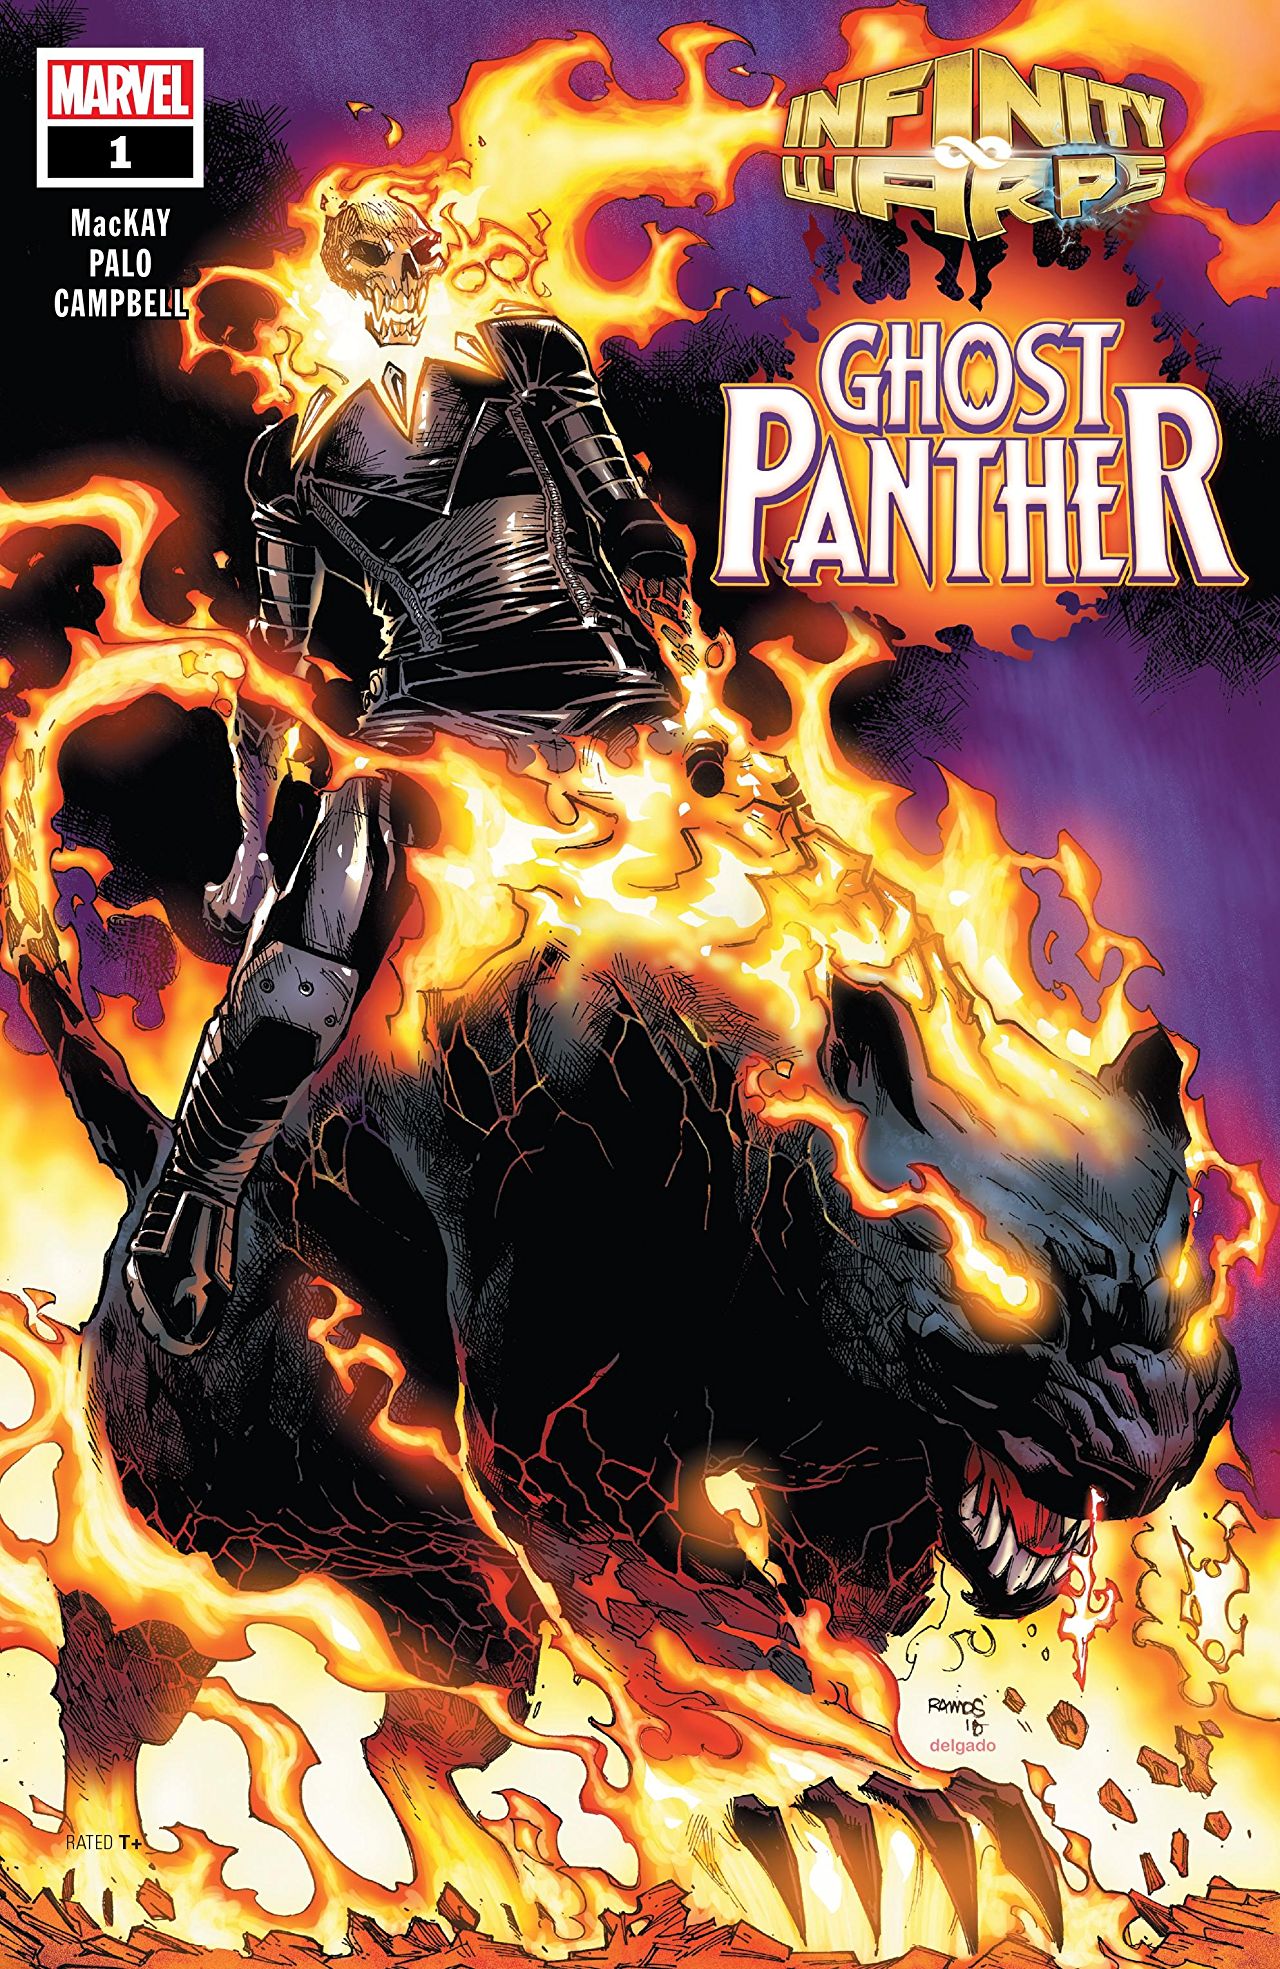 Marvel Preview: Infinity Wars: Ghost Panther #1